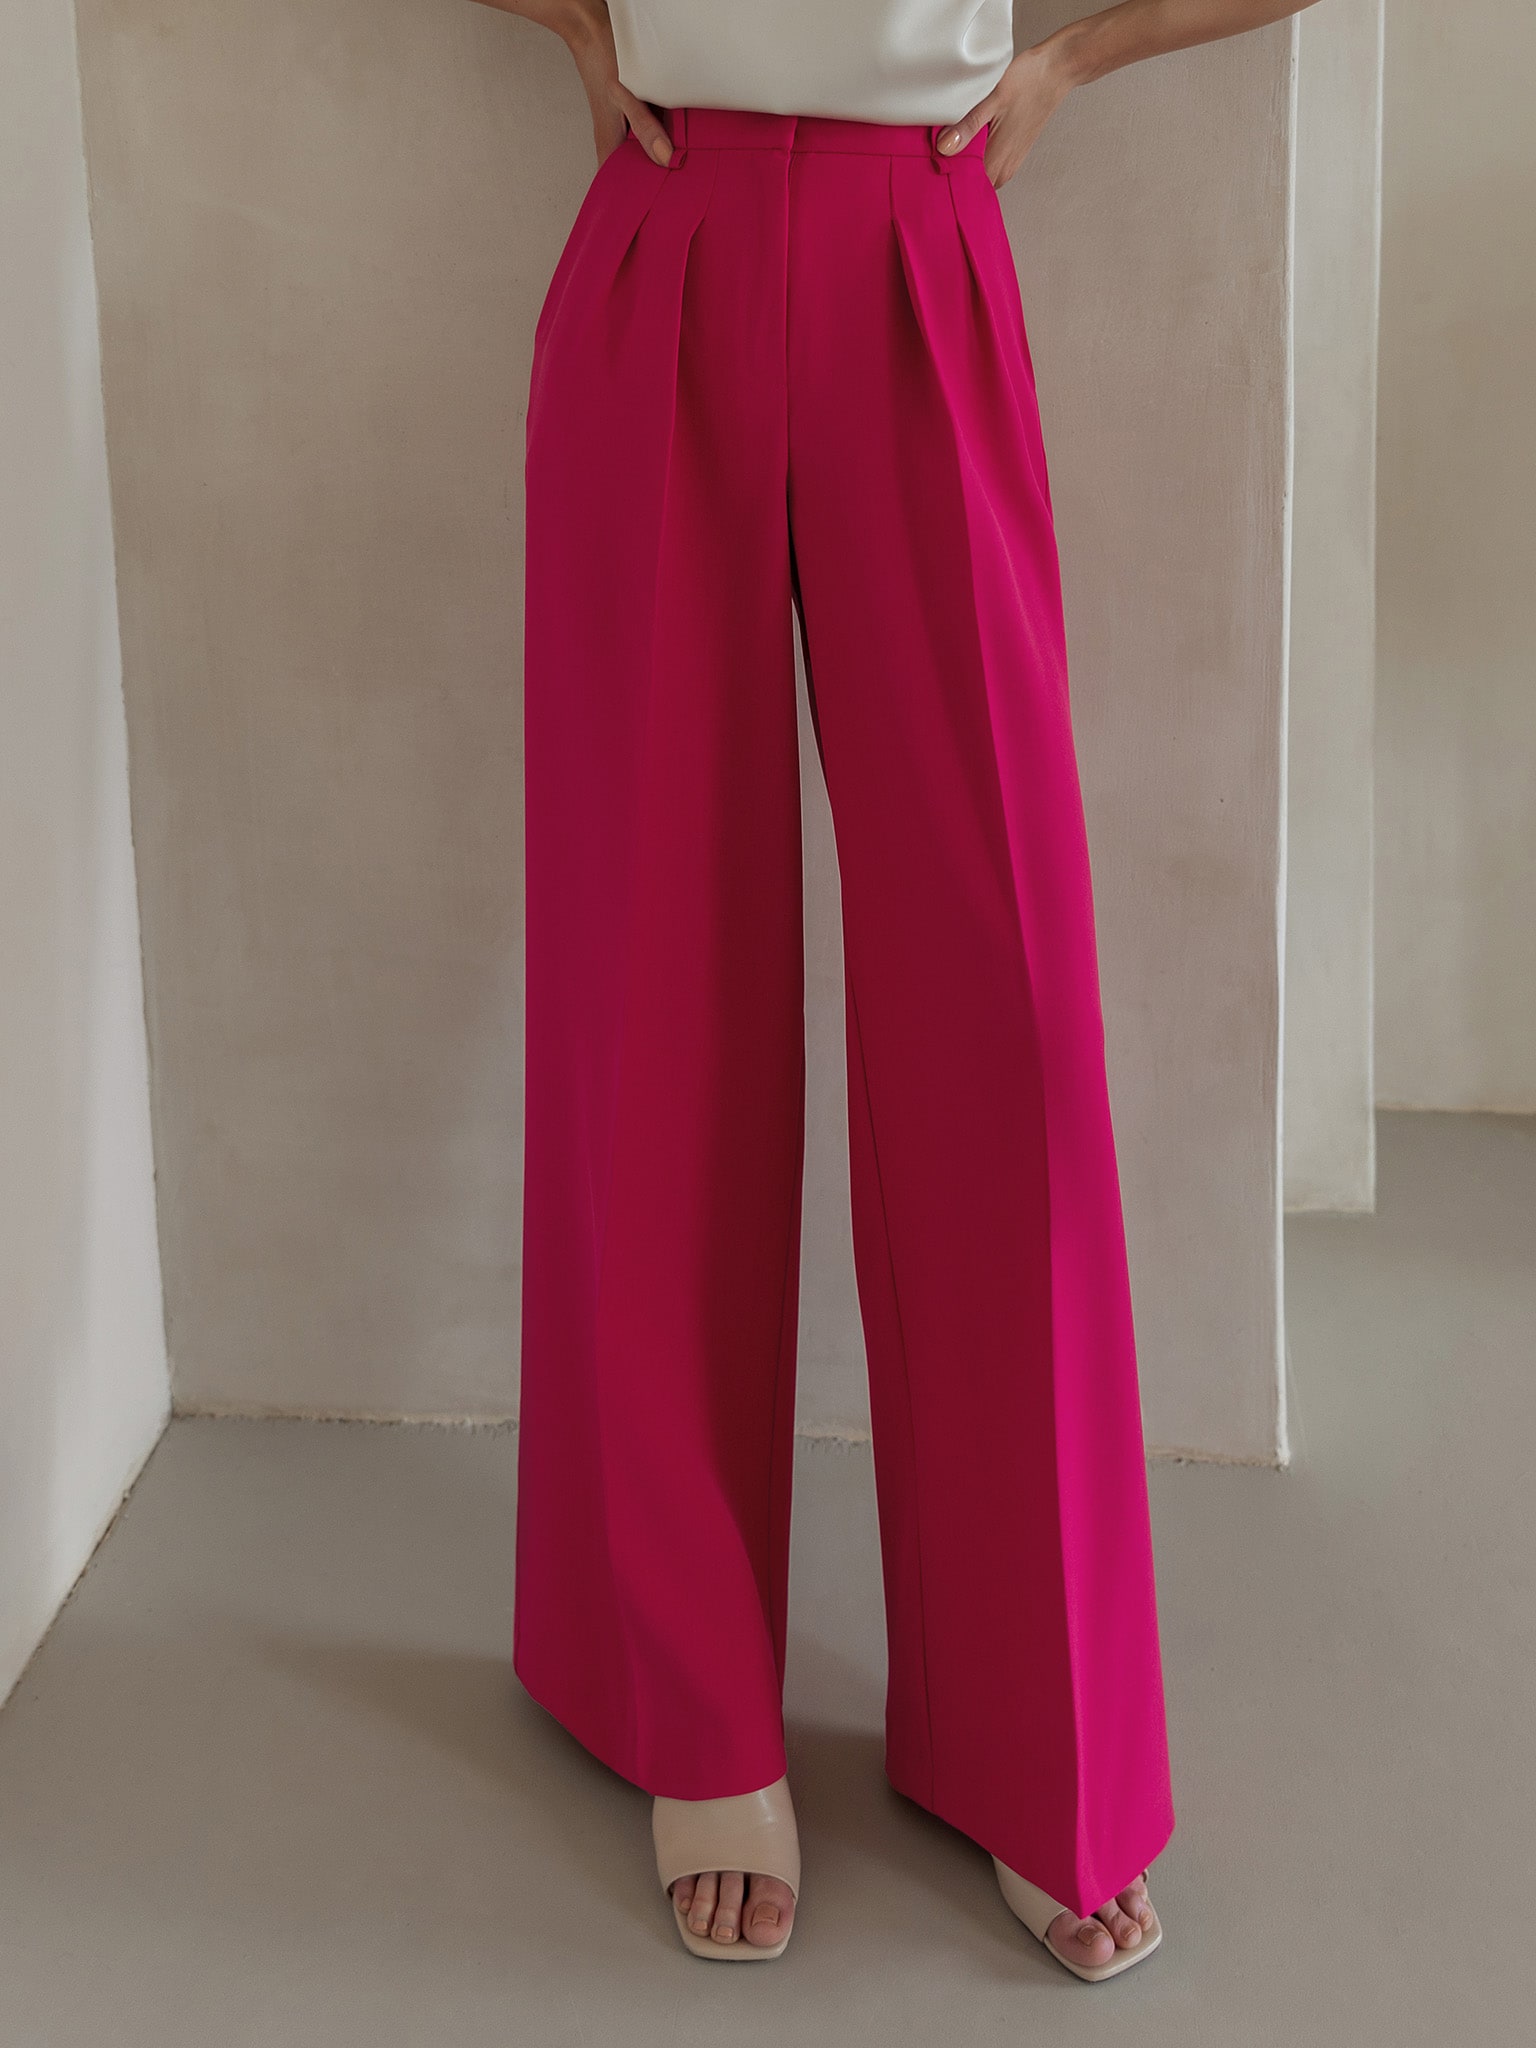 LICHI - Online fashion store :: Pleated palazzo pants with creases